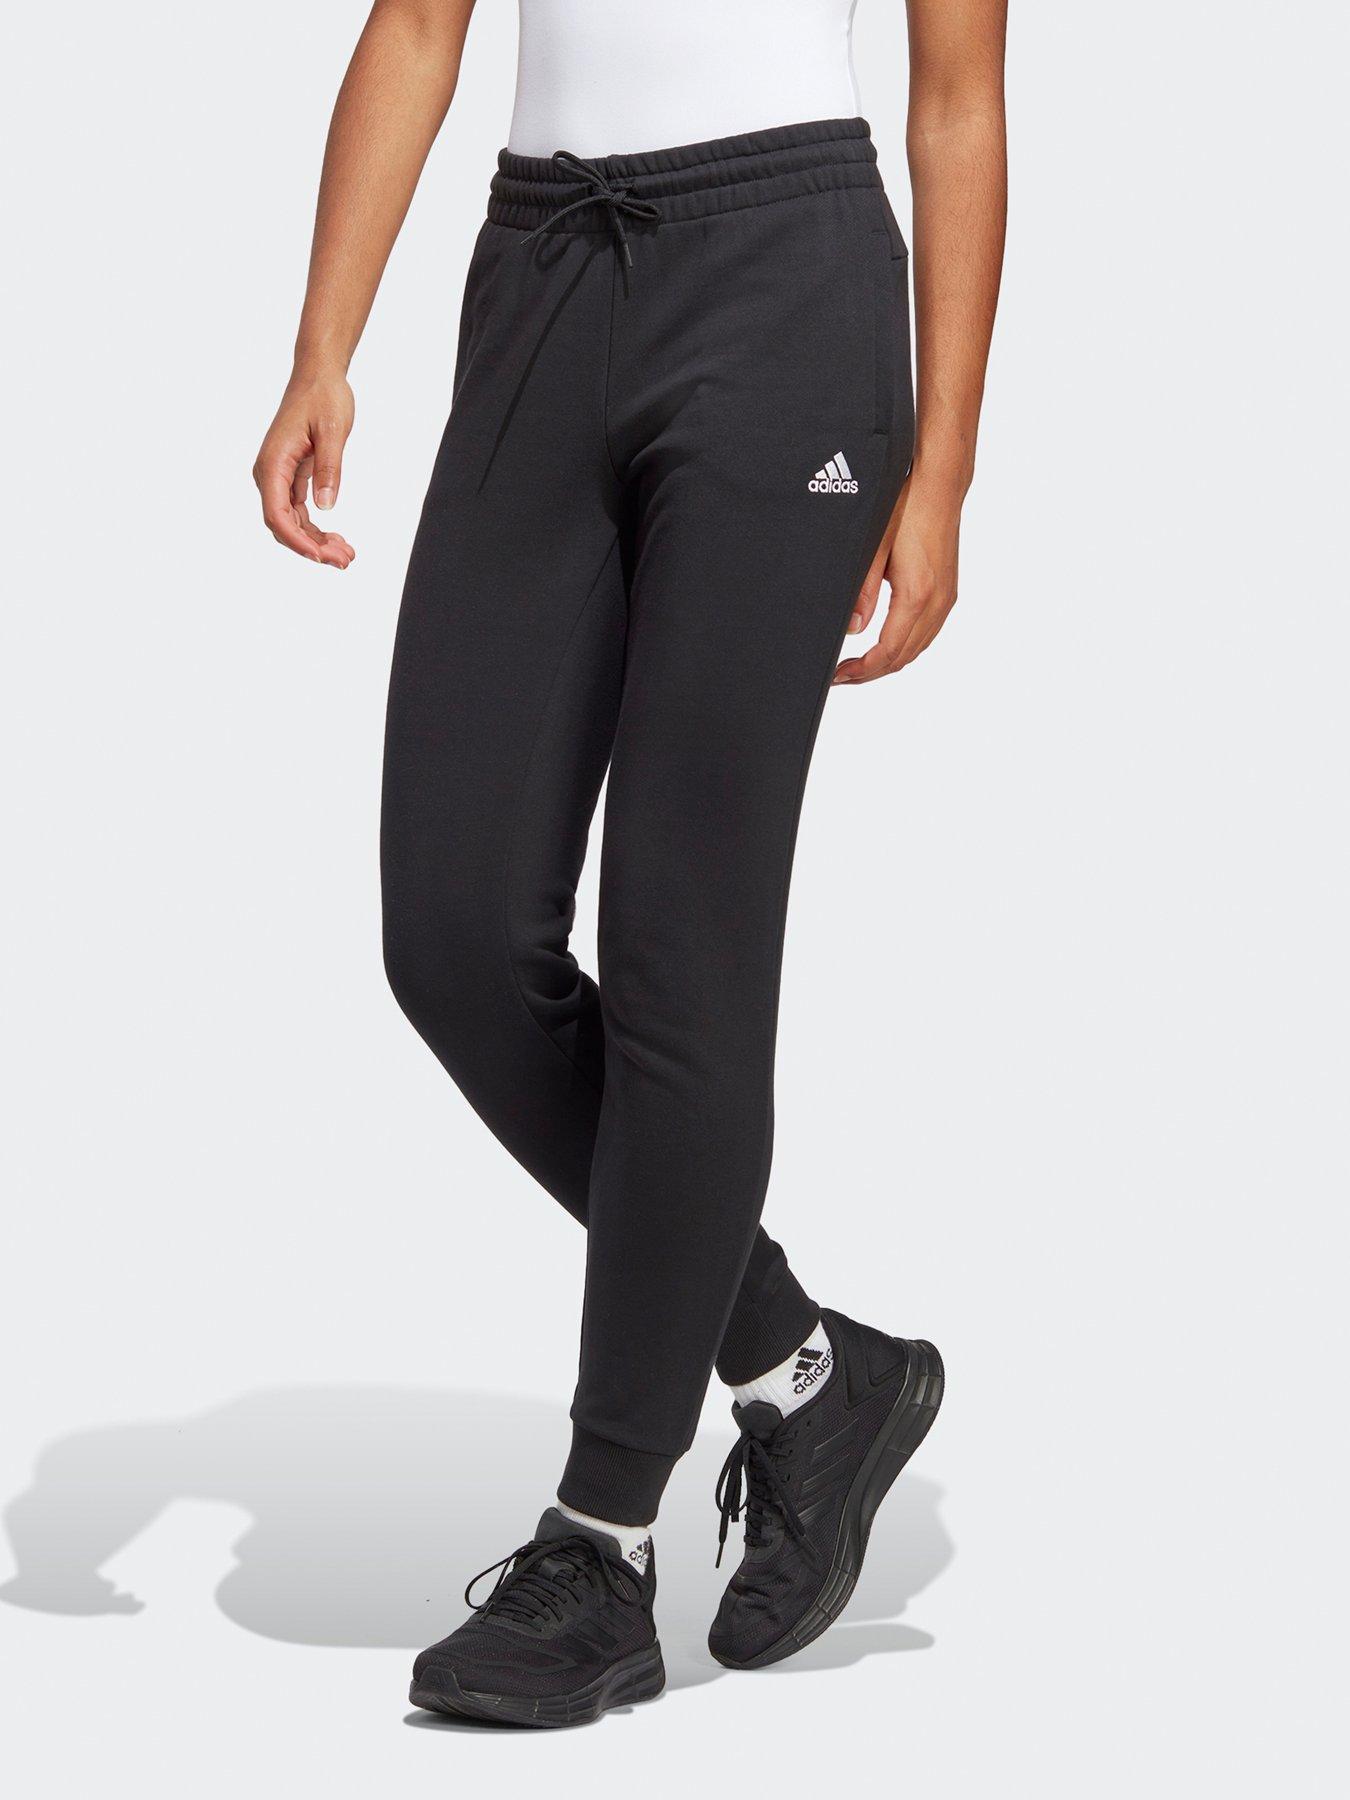 adidas, Pants & Jumpsuits, Brand New Women Adidas Essential Linear Black Tights  Leggings Pants Size Xs